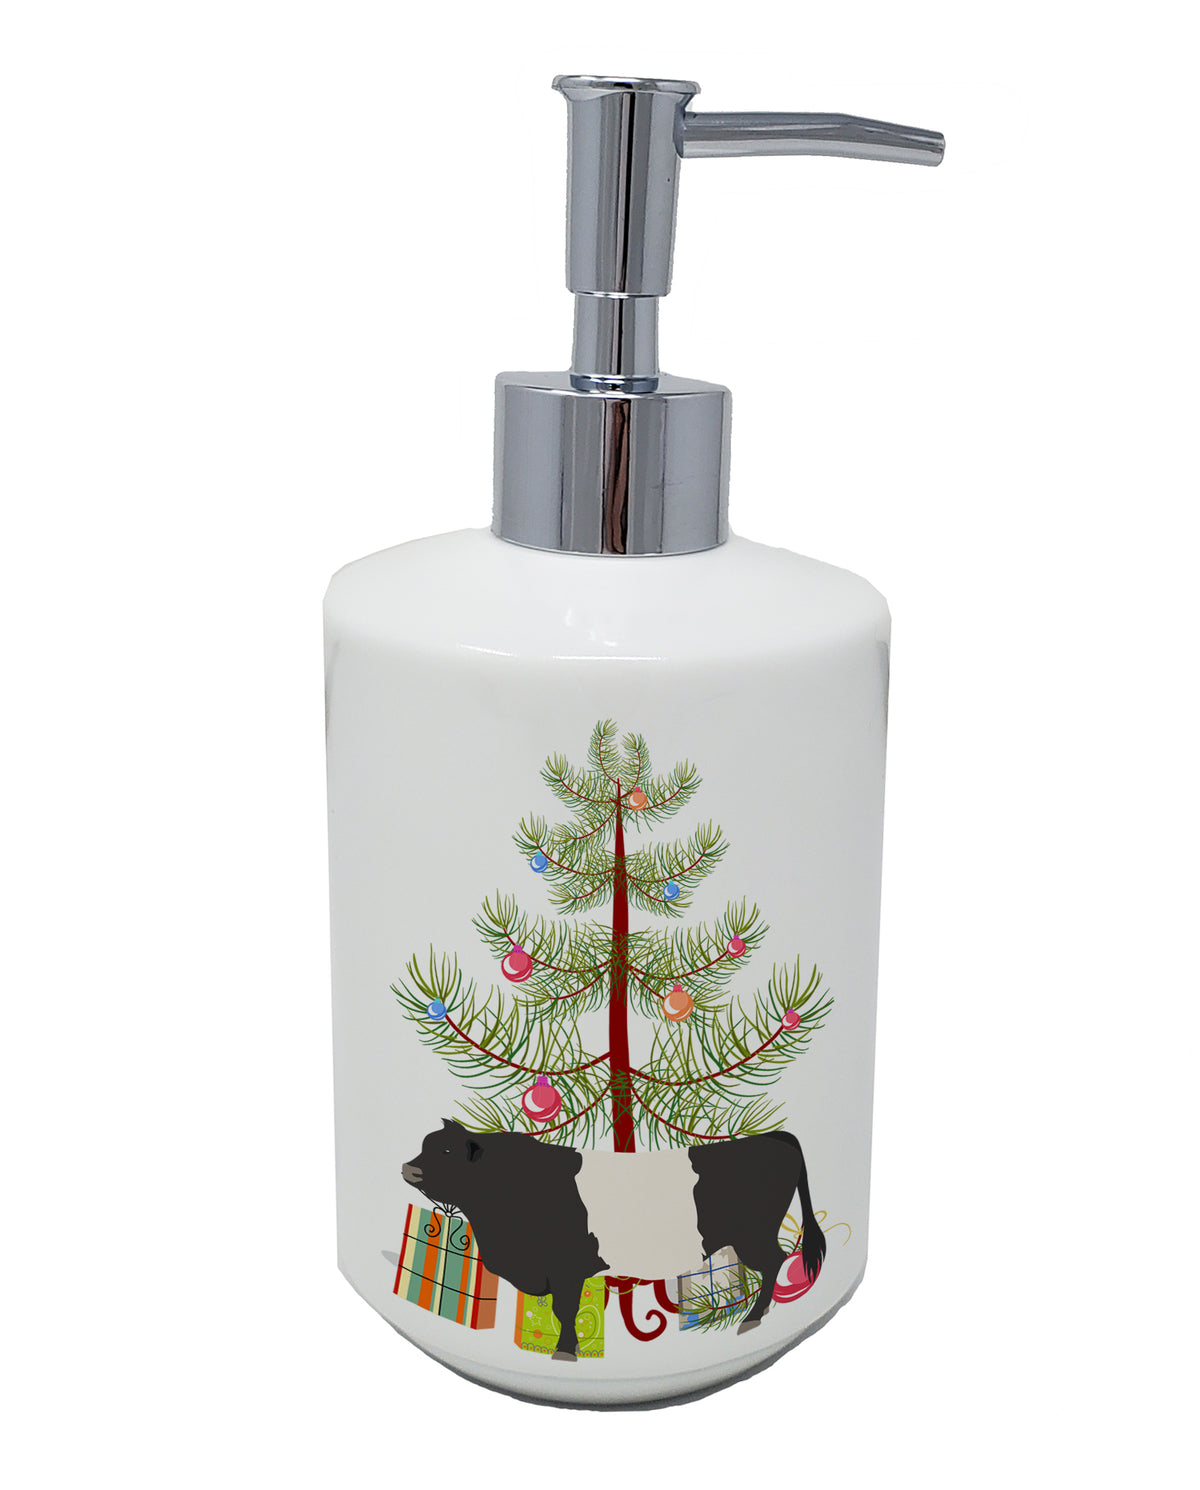 Buy this Belted Galloway Cow Christmas Ceramic Soap Dispenser